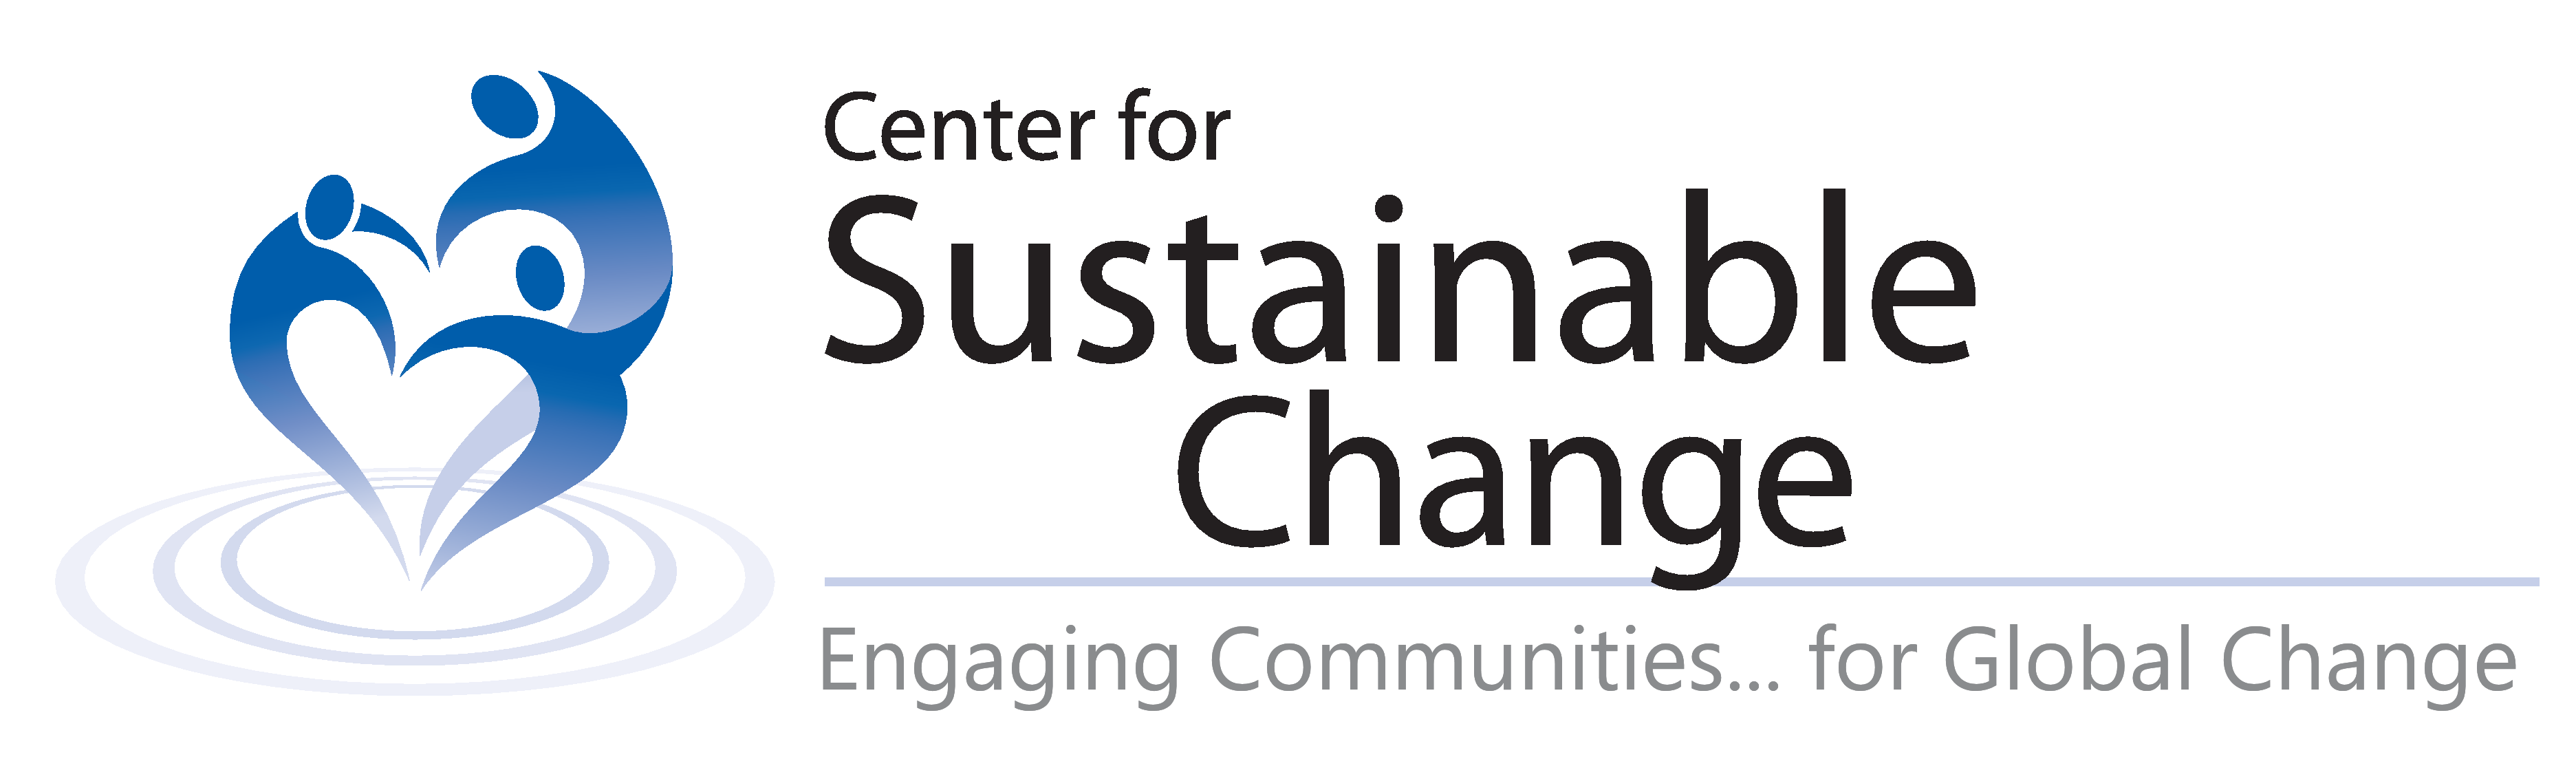 Center for Sustainable Change logo